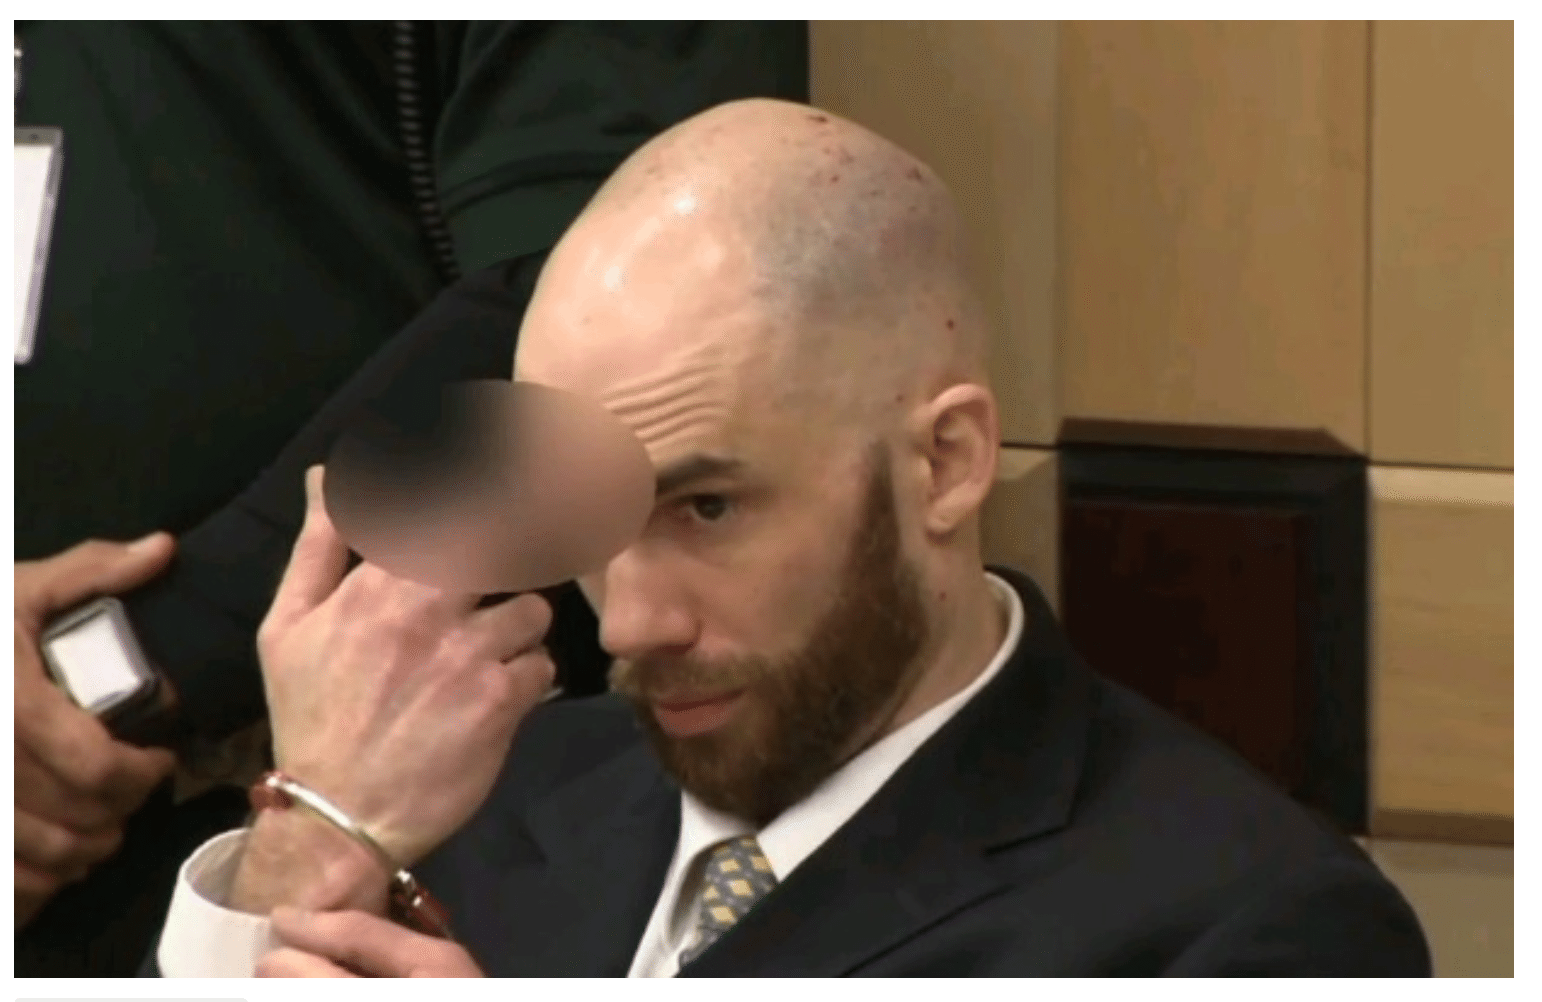 Killer of gay couple flips off victims’ families in court